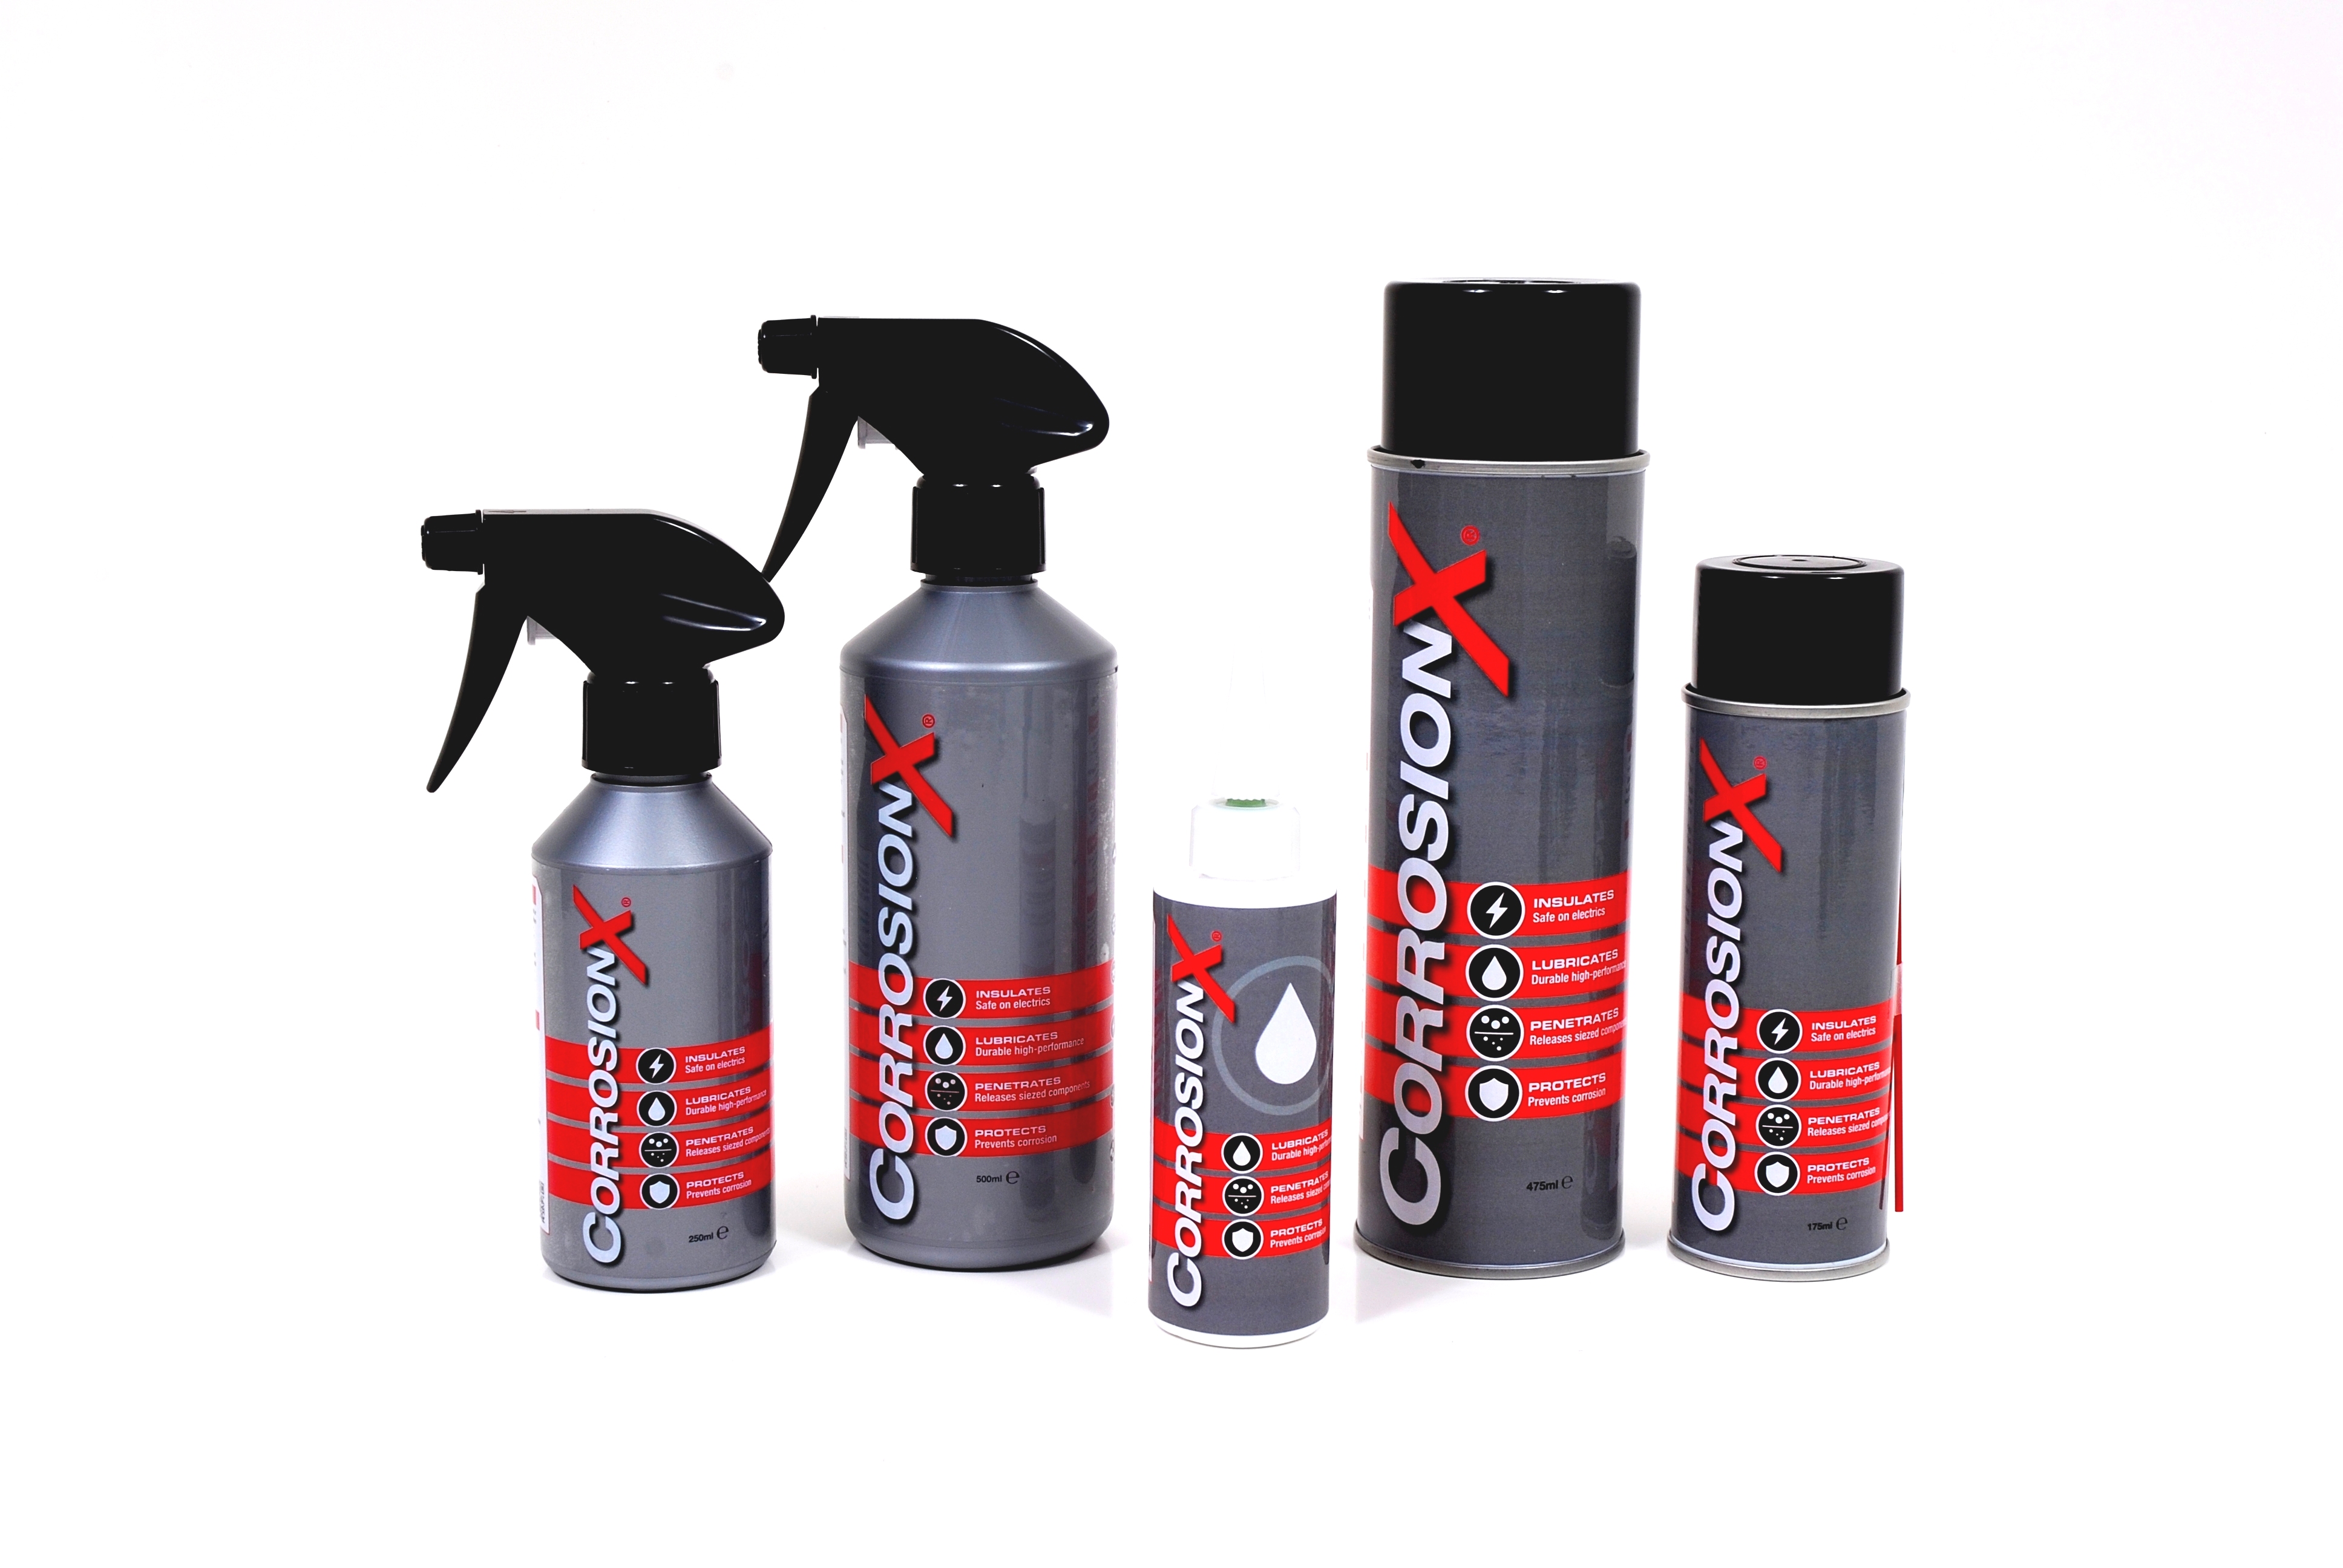 About CorrosionX - the product range - image